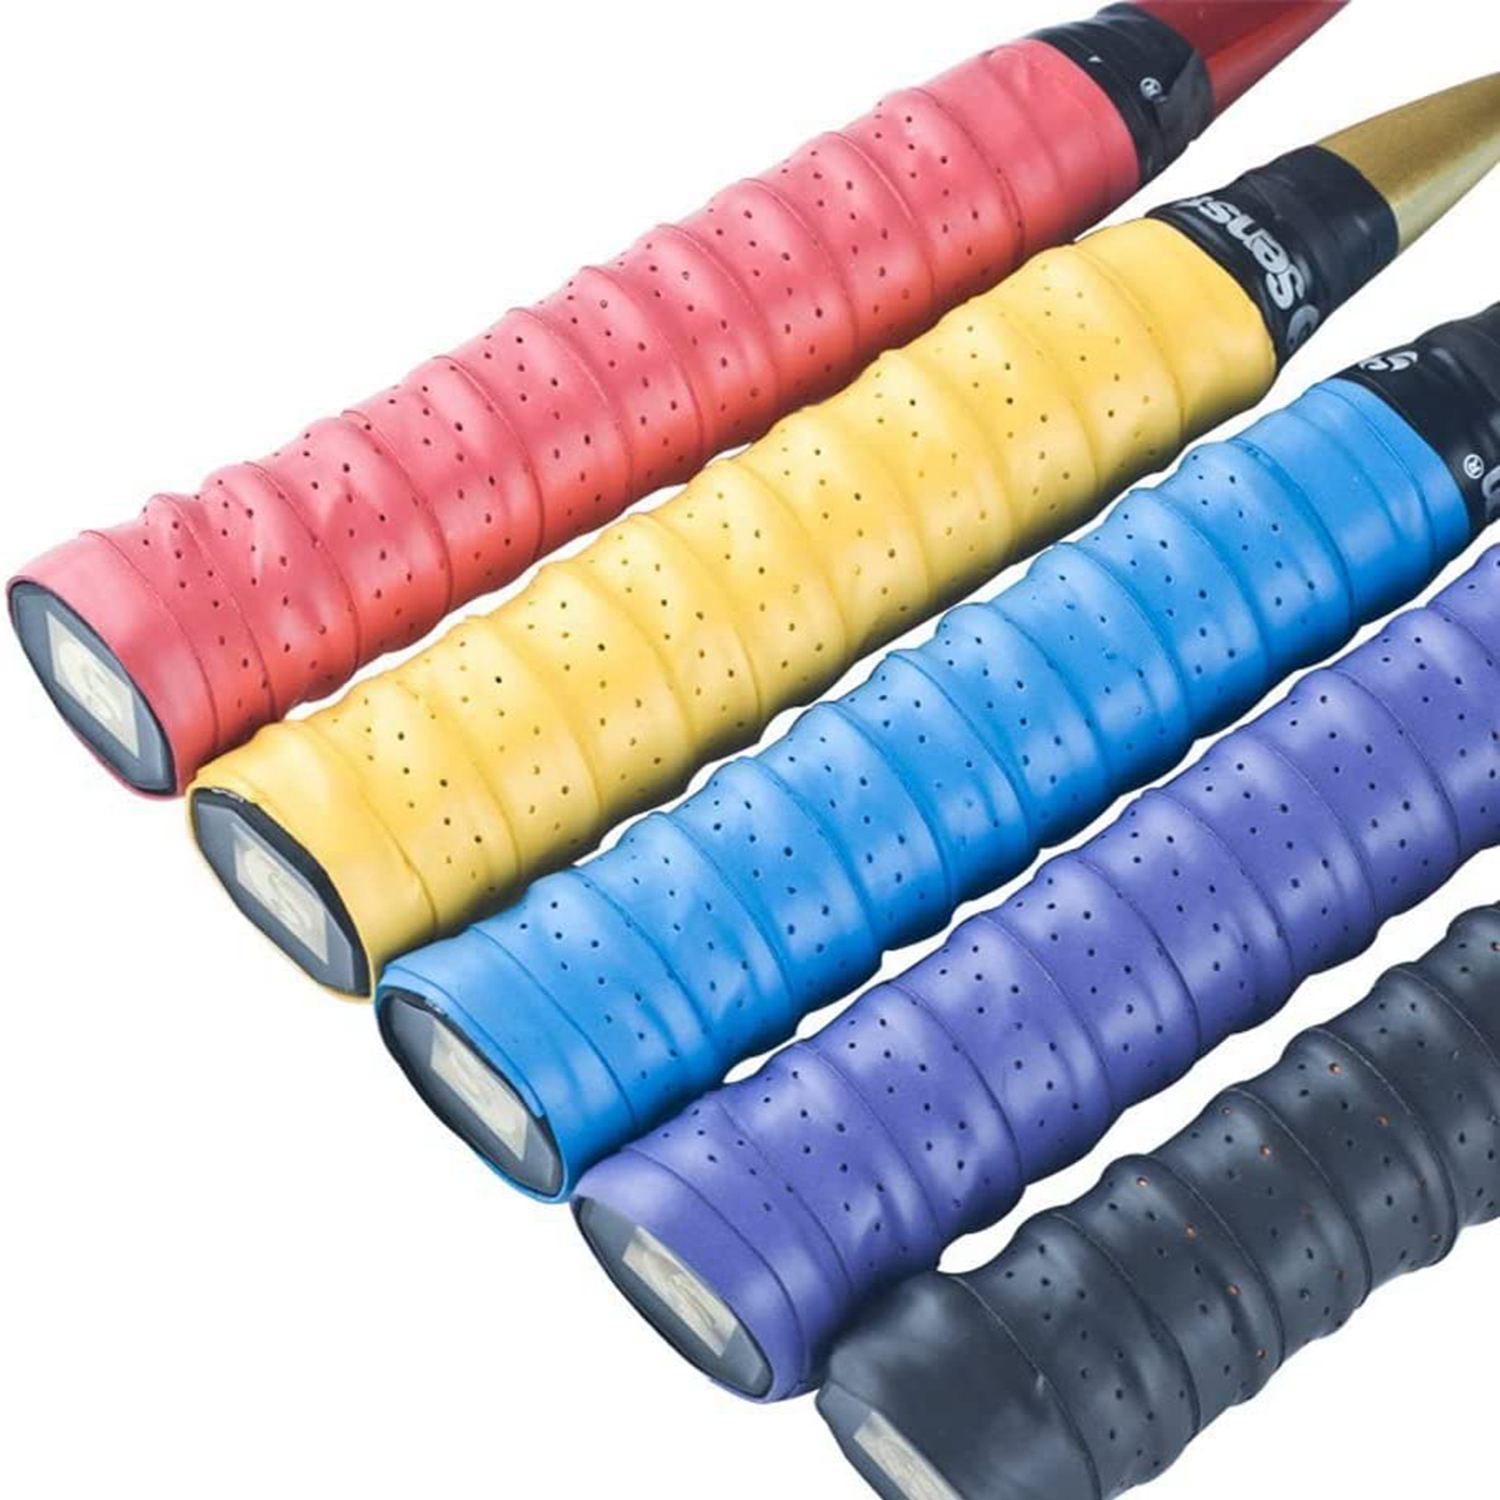 Kisangel 6pcs Strap on Grip Tape Tennis Grip Protective bat Sleeve Softball  bat Tape Racket overgrips Tapes Grip Wrapping Tape Grip Strap Hand Glue